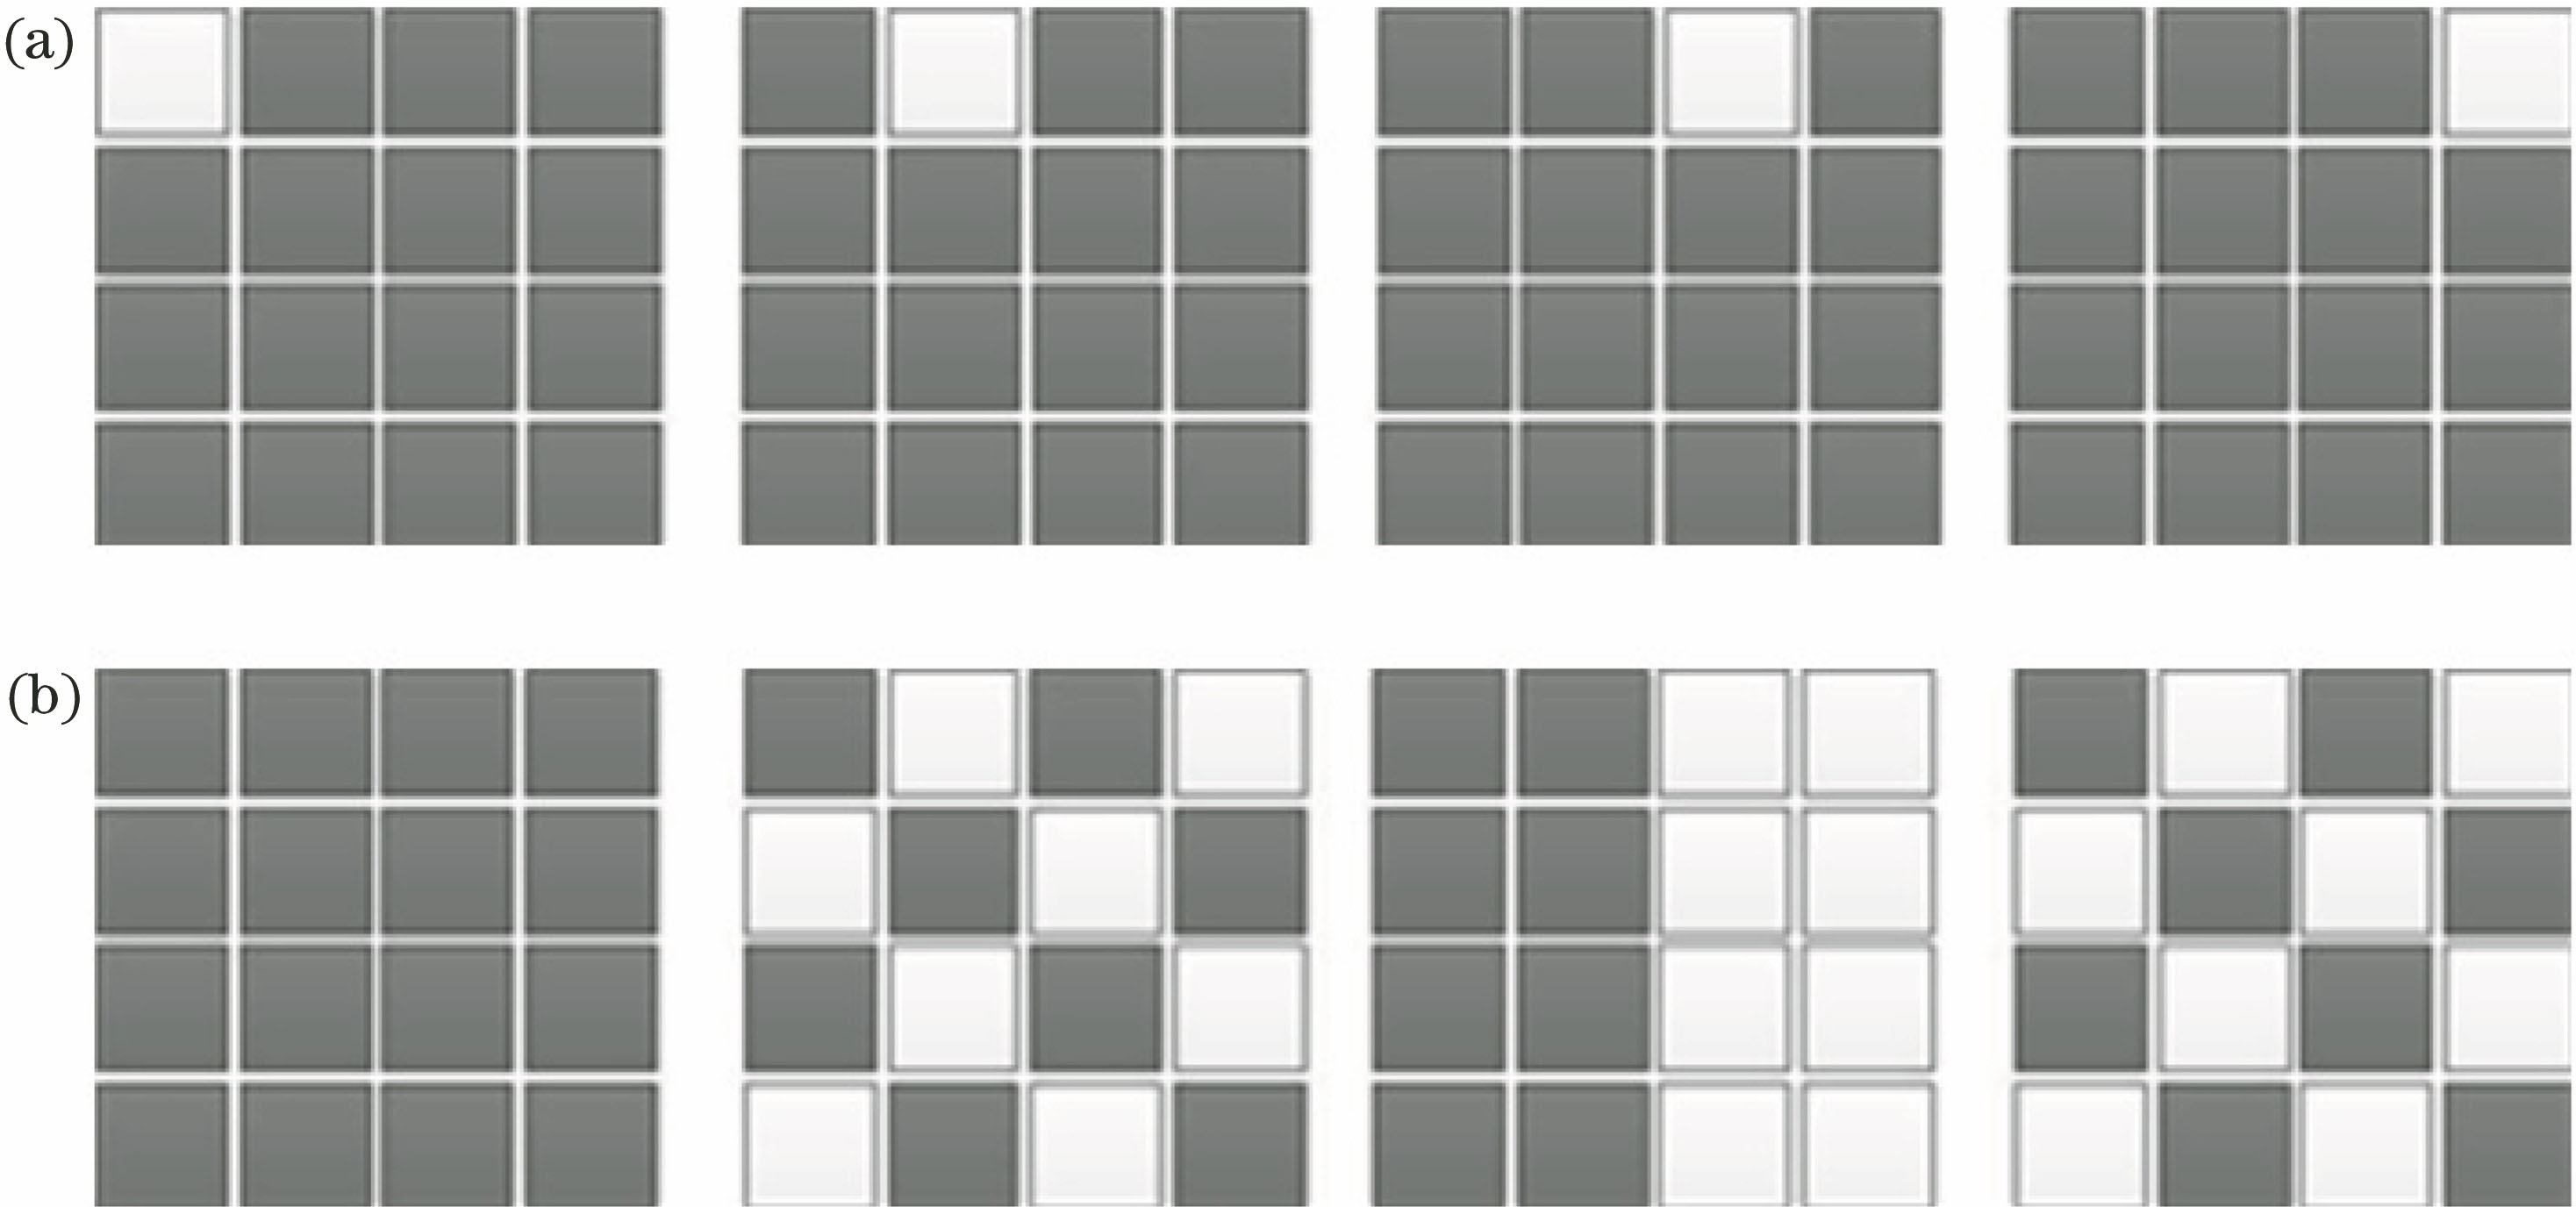 Comparison between modulation in Hadamard basis and Cartesian basis. (a) Cartesian basis, gray is not reflection pixel, equals to 0, white is reflection pixel, equals to 1; (b) Hadamard basis, gray and white are both reflection pixels, gray equals to -1 and white equals to 1, phase lag of gray is π comparing to white